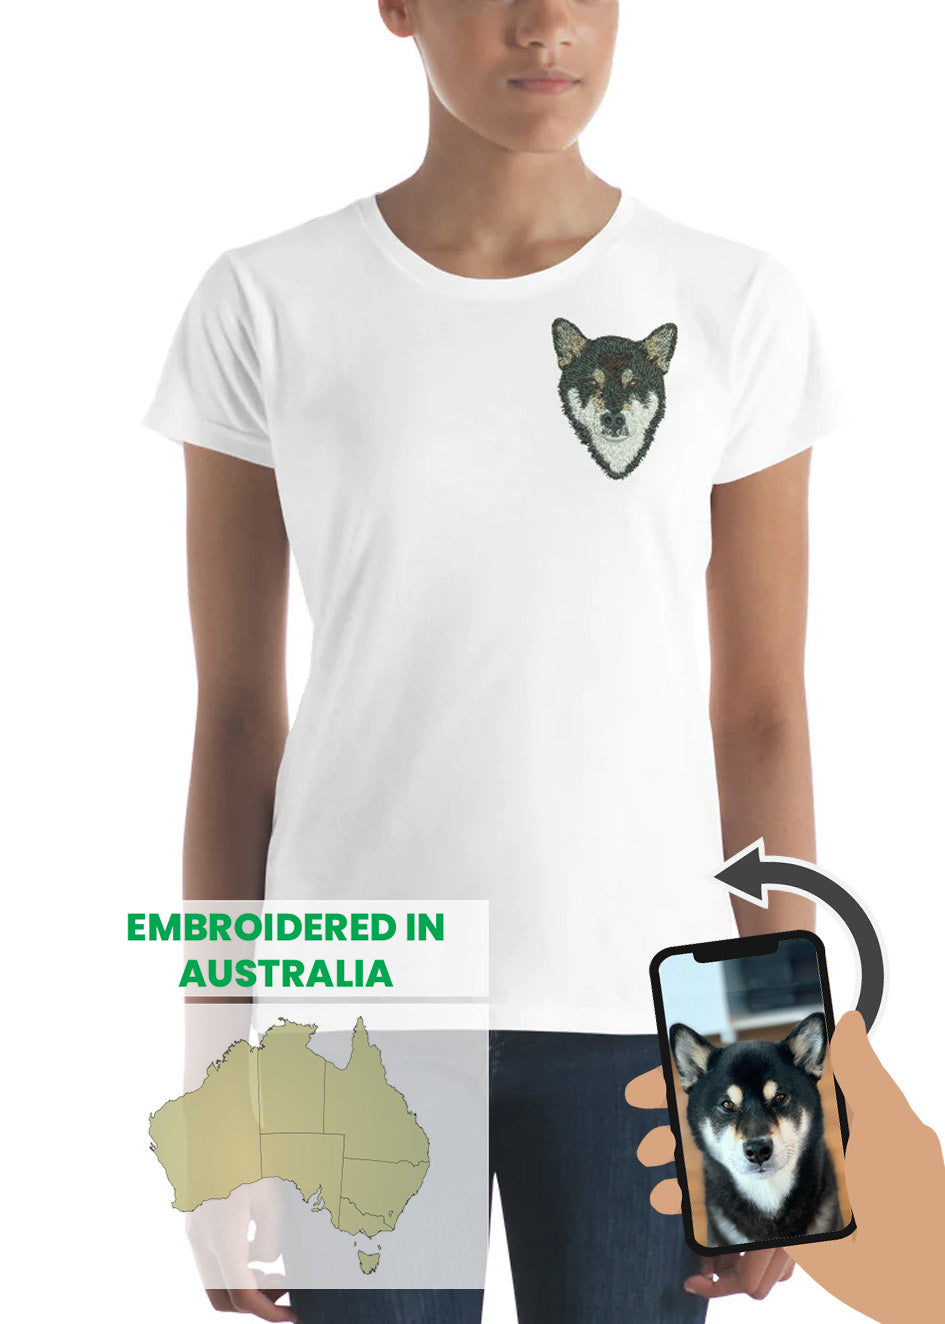 Custom Pet Embroidery - Women's T-Shirt (NEXT-DAY prod. avail. at checkout) (Dog or Cat only)